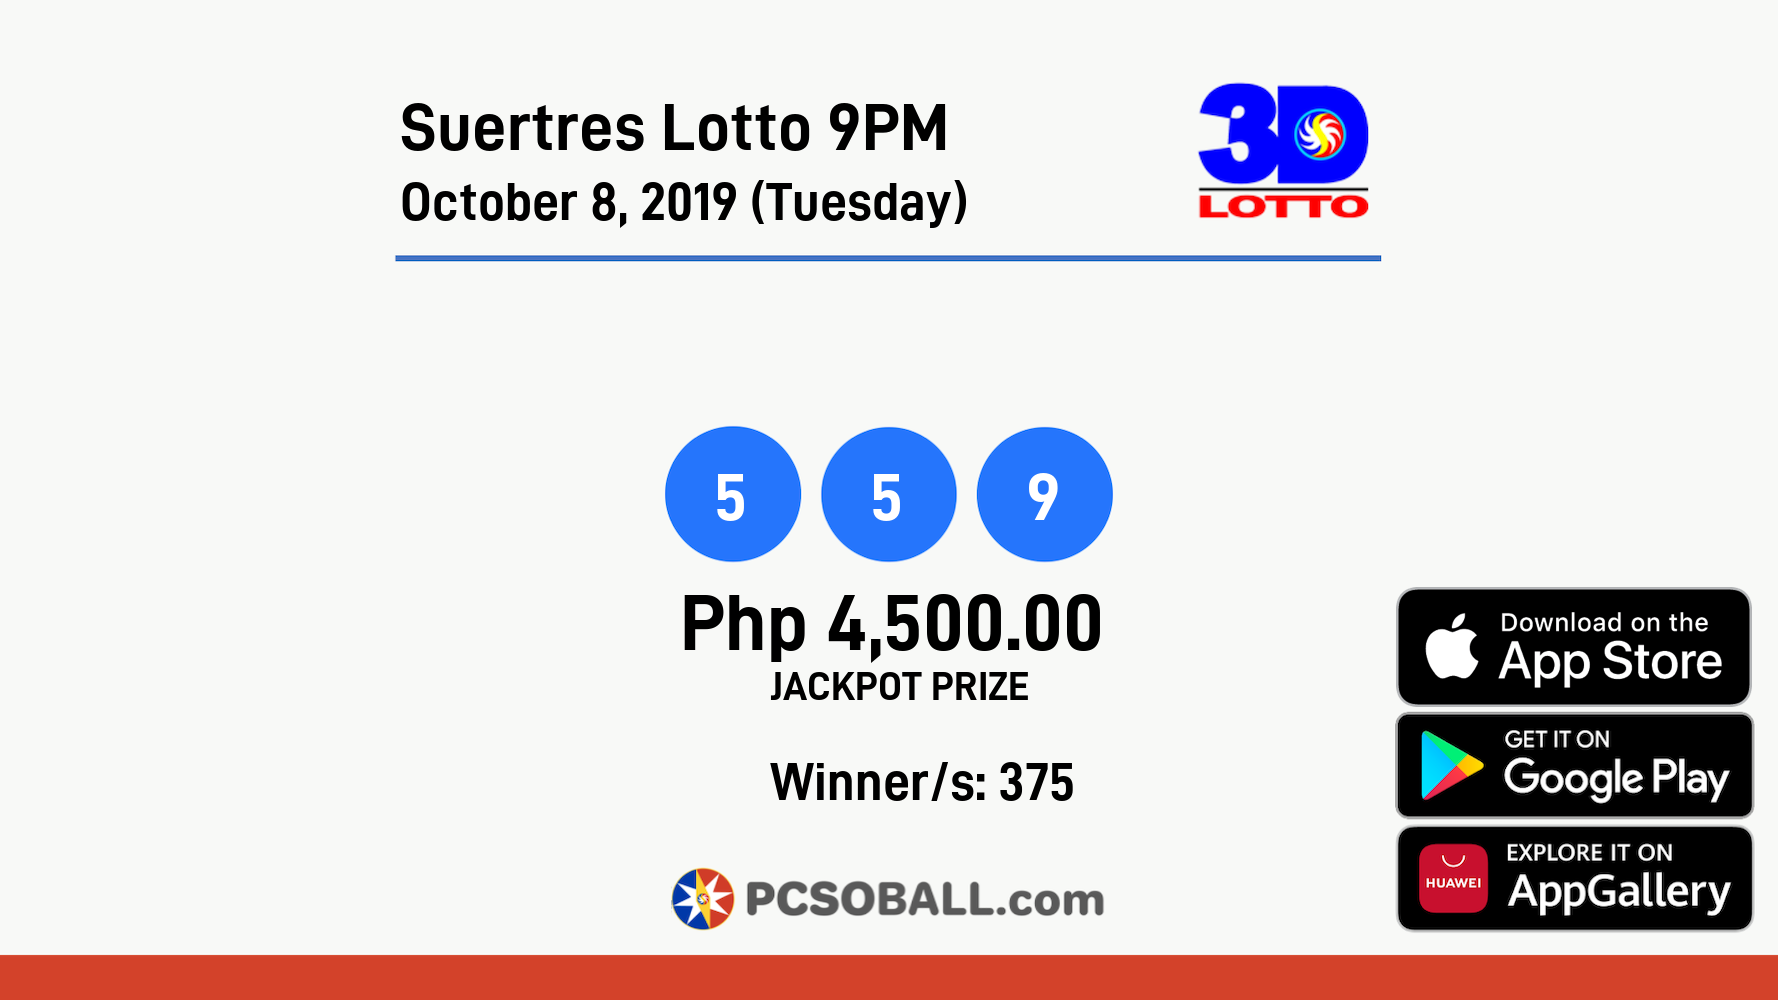 Suertres Lotto 9PM October 8, 2019 (Tuesday) Result